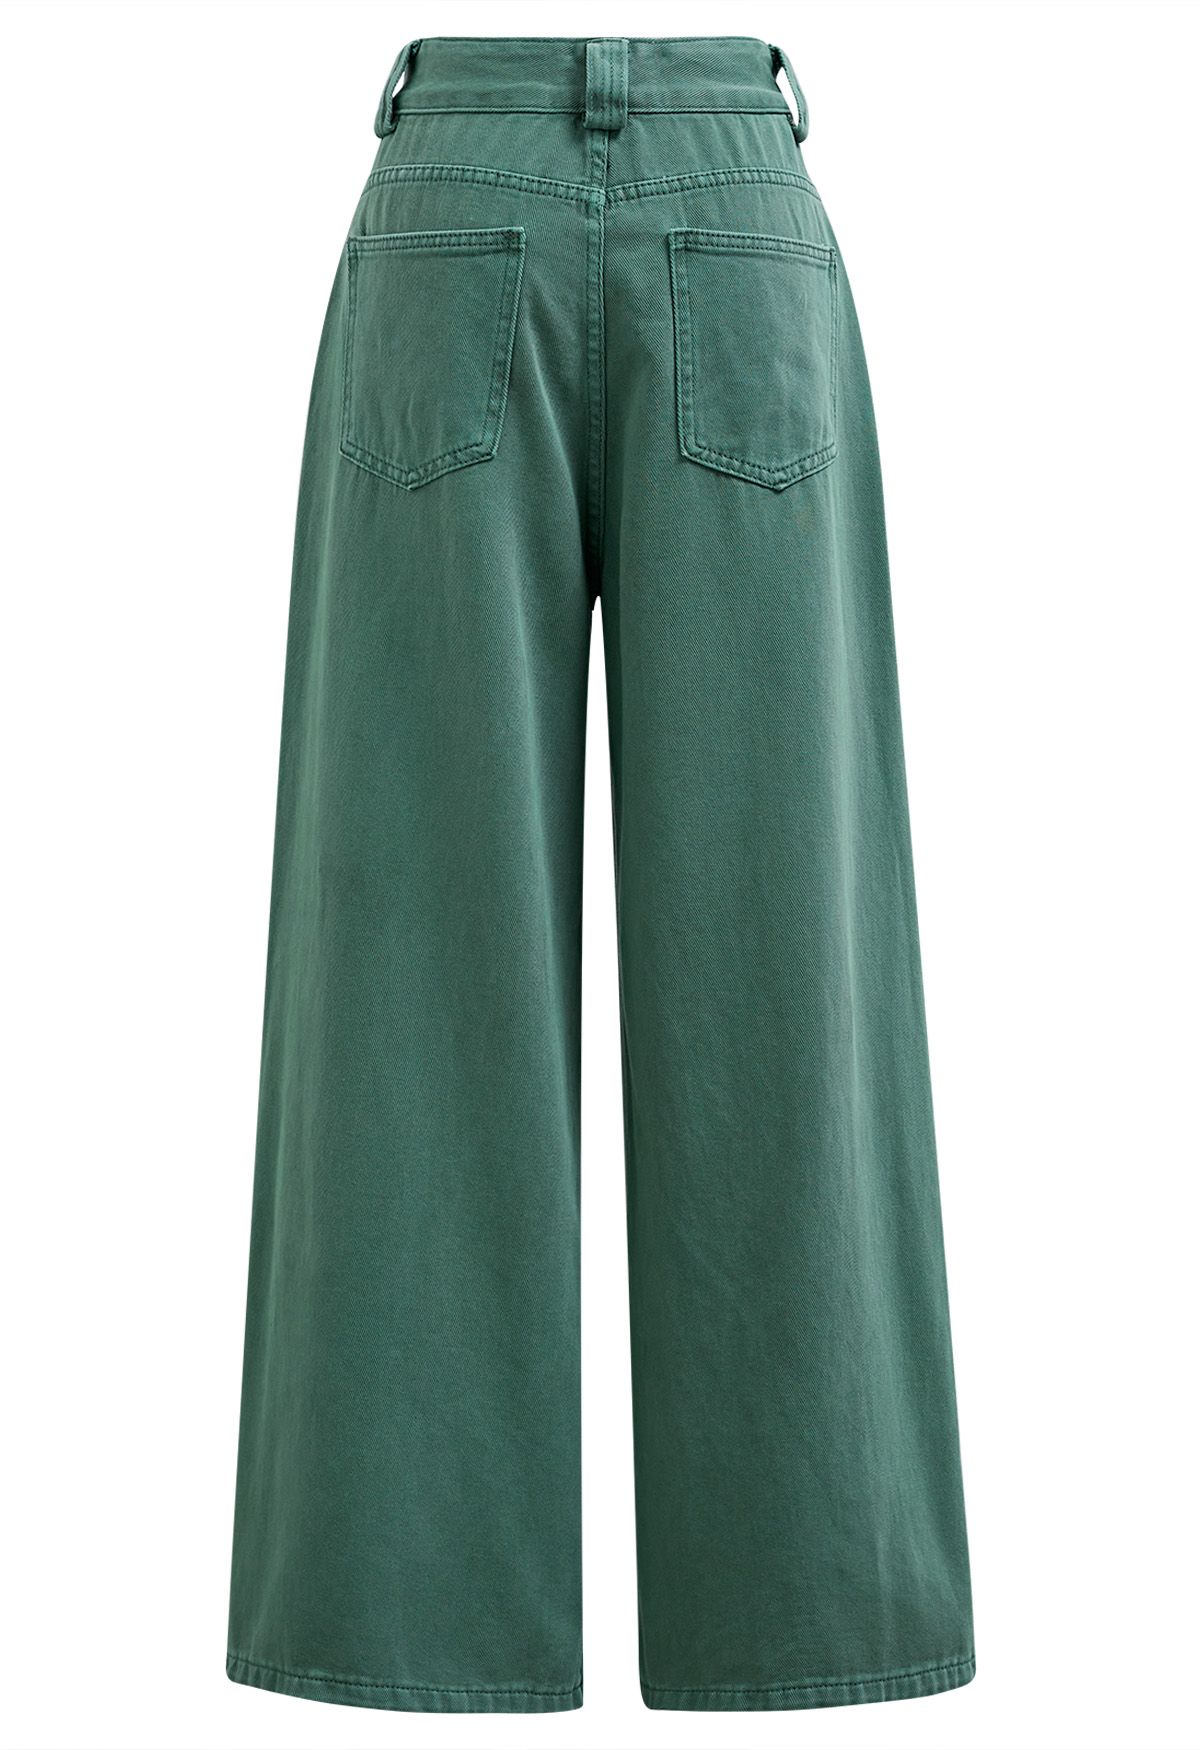 Vintage Charm Straight Leg Jeans in Green - Retro, Indie and Unique Fashion